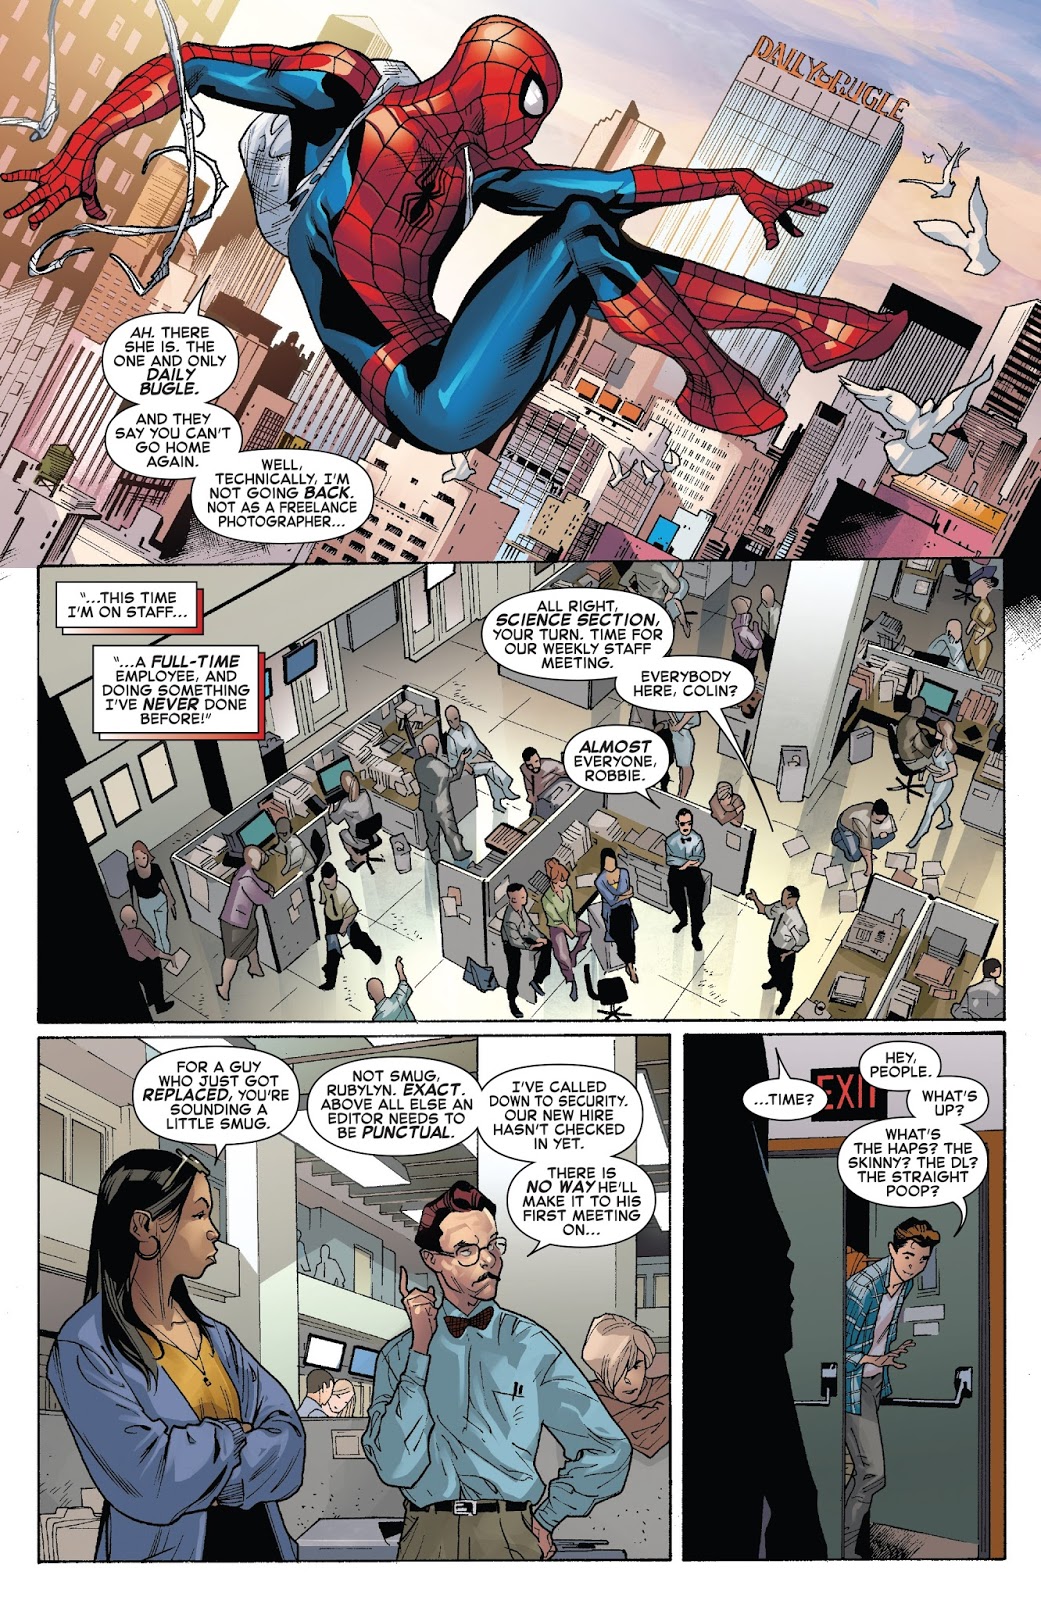 From – Amazing Spider-man Vol. 1 #799